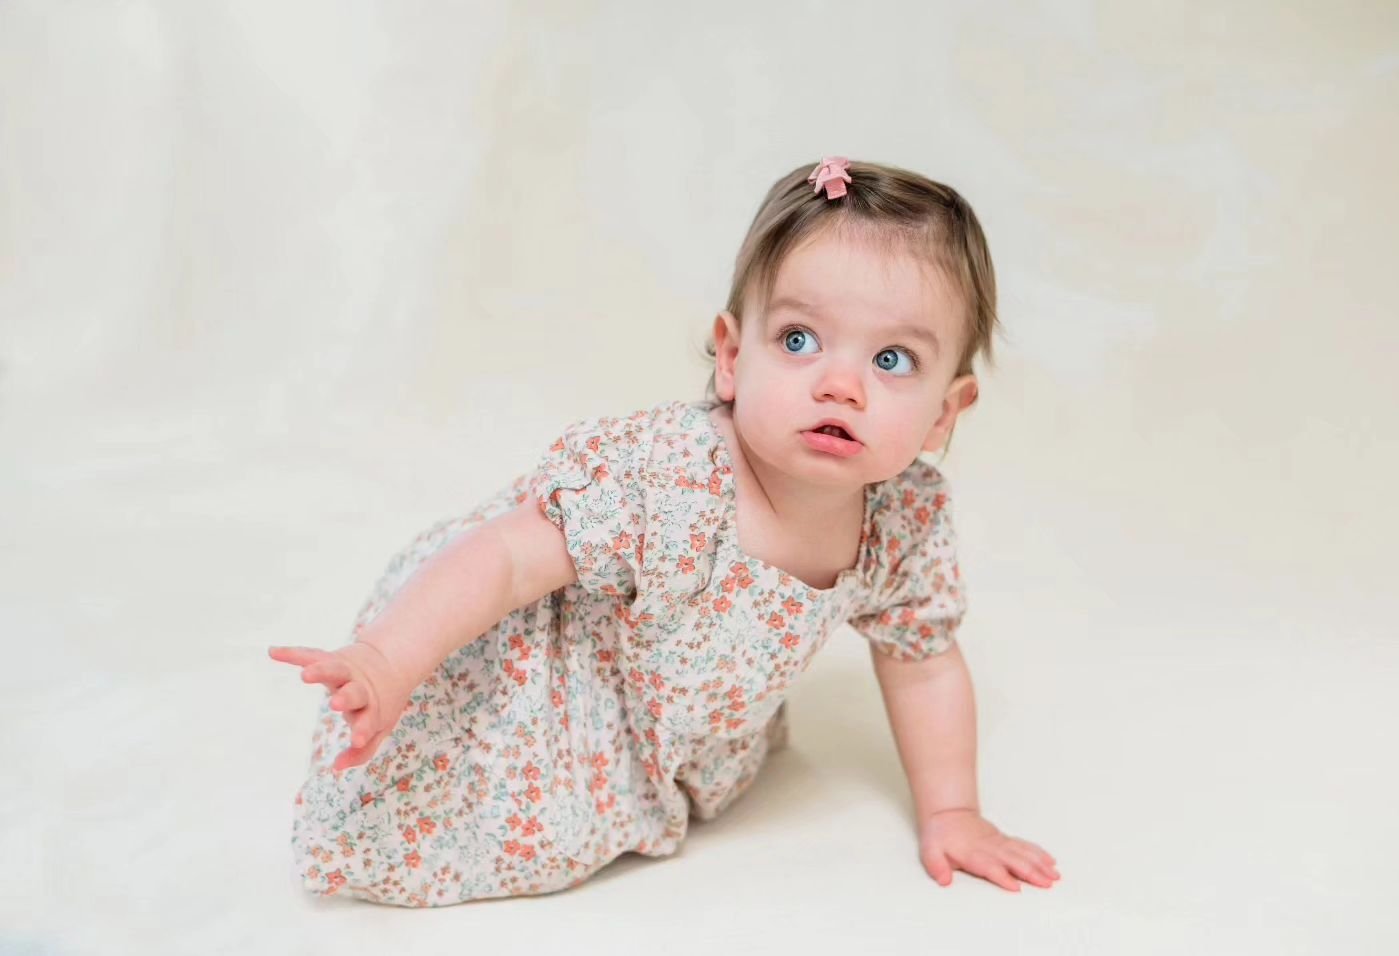 I just have to share a few more of this beautiful blue eyed girl. I was mesmerized by her.

NJ Baby Photographer

#njmom
#njmomblogger 
#njphotographer 
#njbabyphotography 
#oceanportnj
#monmouthcountyphotographer 
#monmouthcountymoms